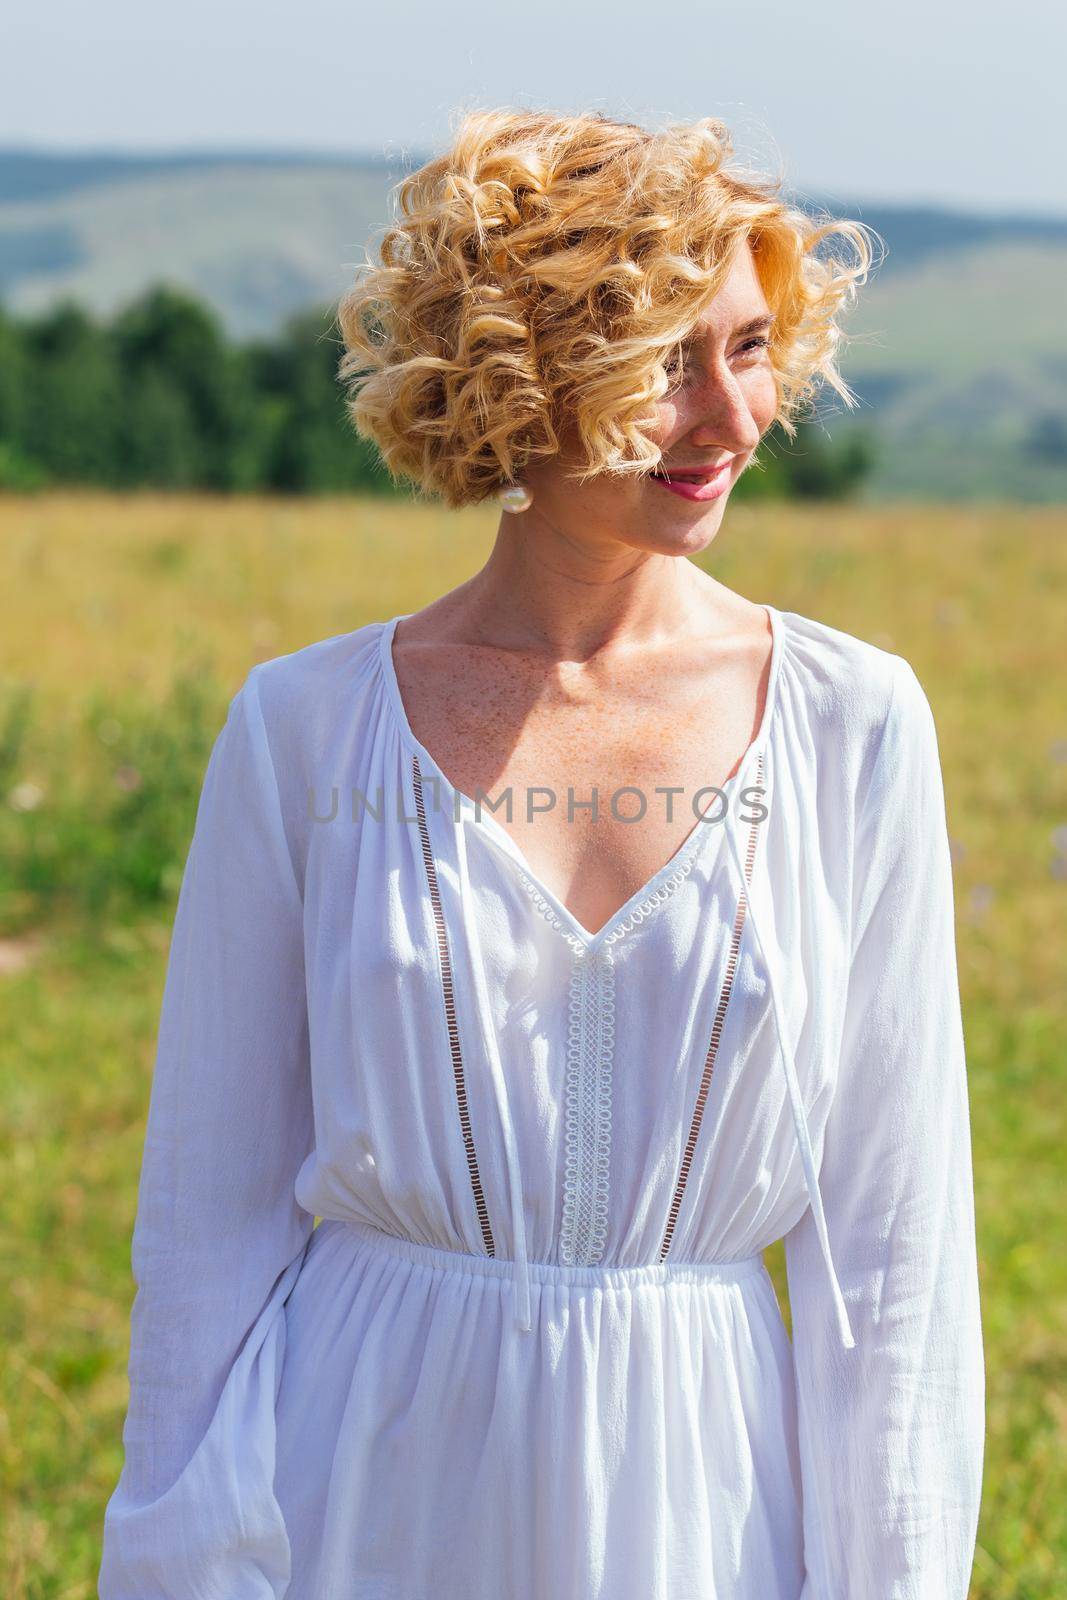 Beautiful blonde woman with short curly hair outdoors. Romantic model in summer white dress.